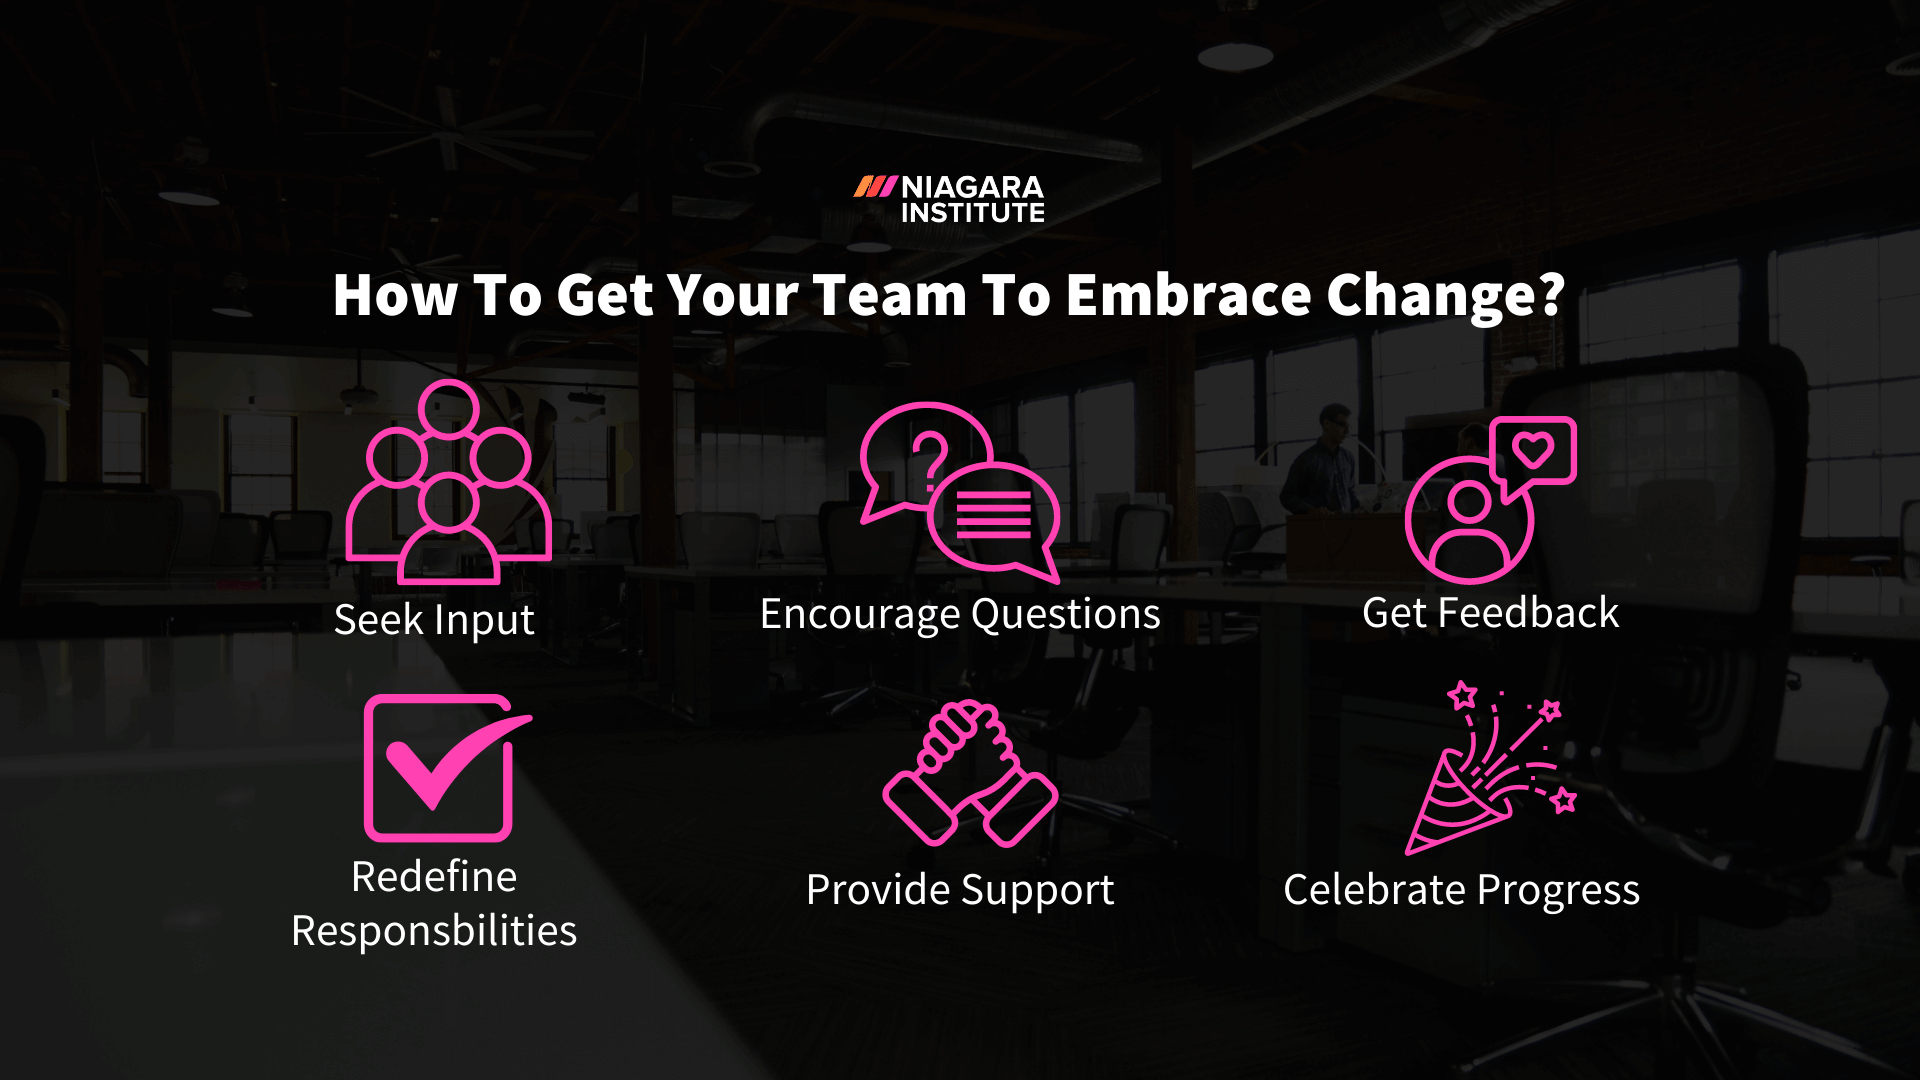 How To Get Your Team To Embrace Change - Niagara Institute (1)